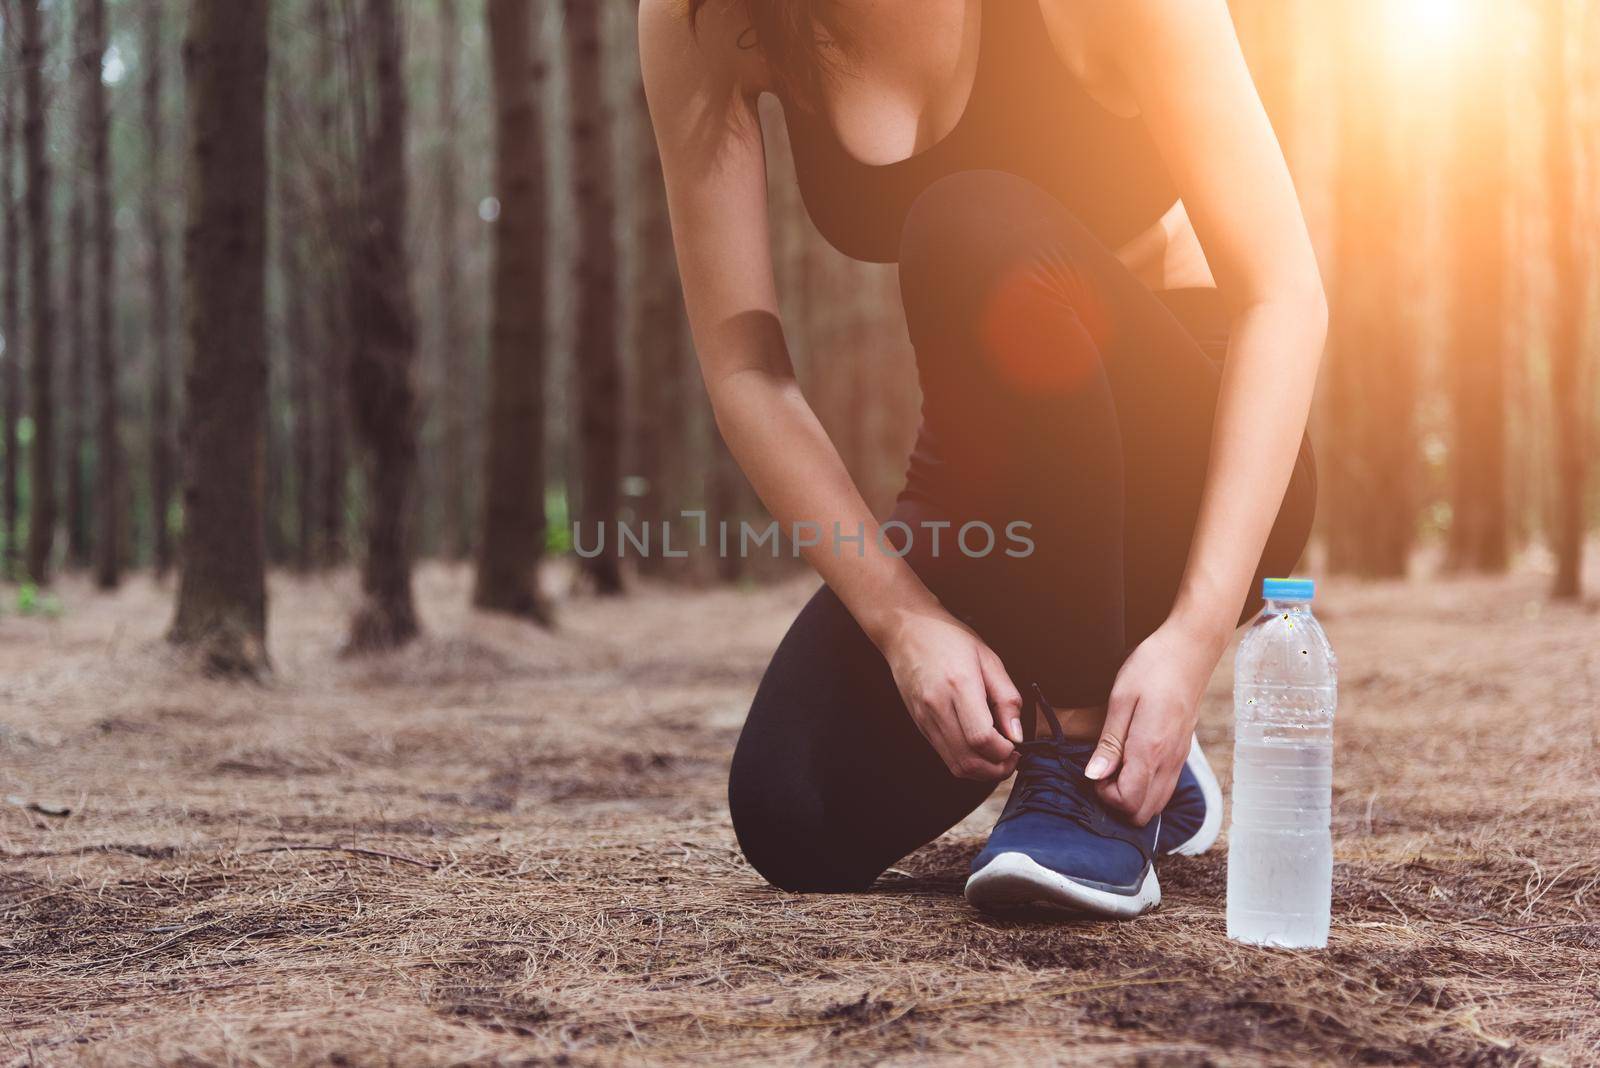 Woman tying up shoelaces when jogging in forest back with drinking water bottle beside hers. Sneakers rope tying. People and lifestyles concept. Healthcare and Wellness theme. Park and Outdoors theme.